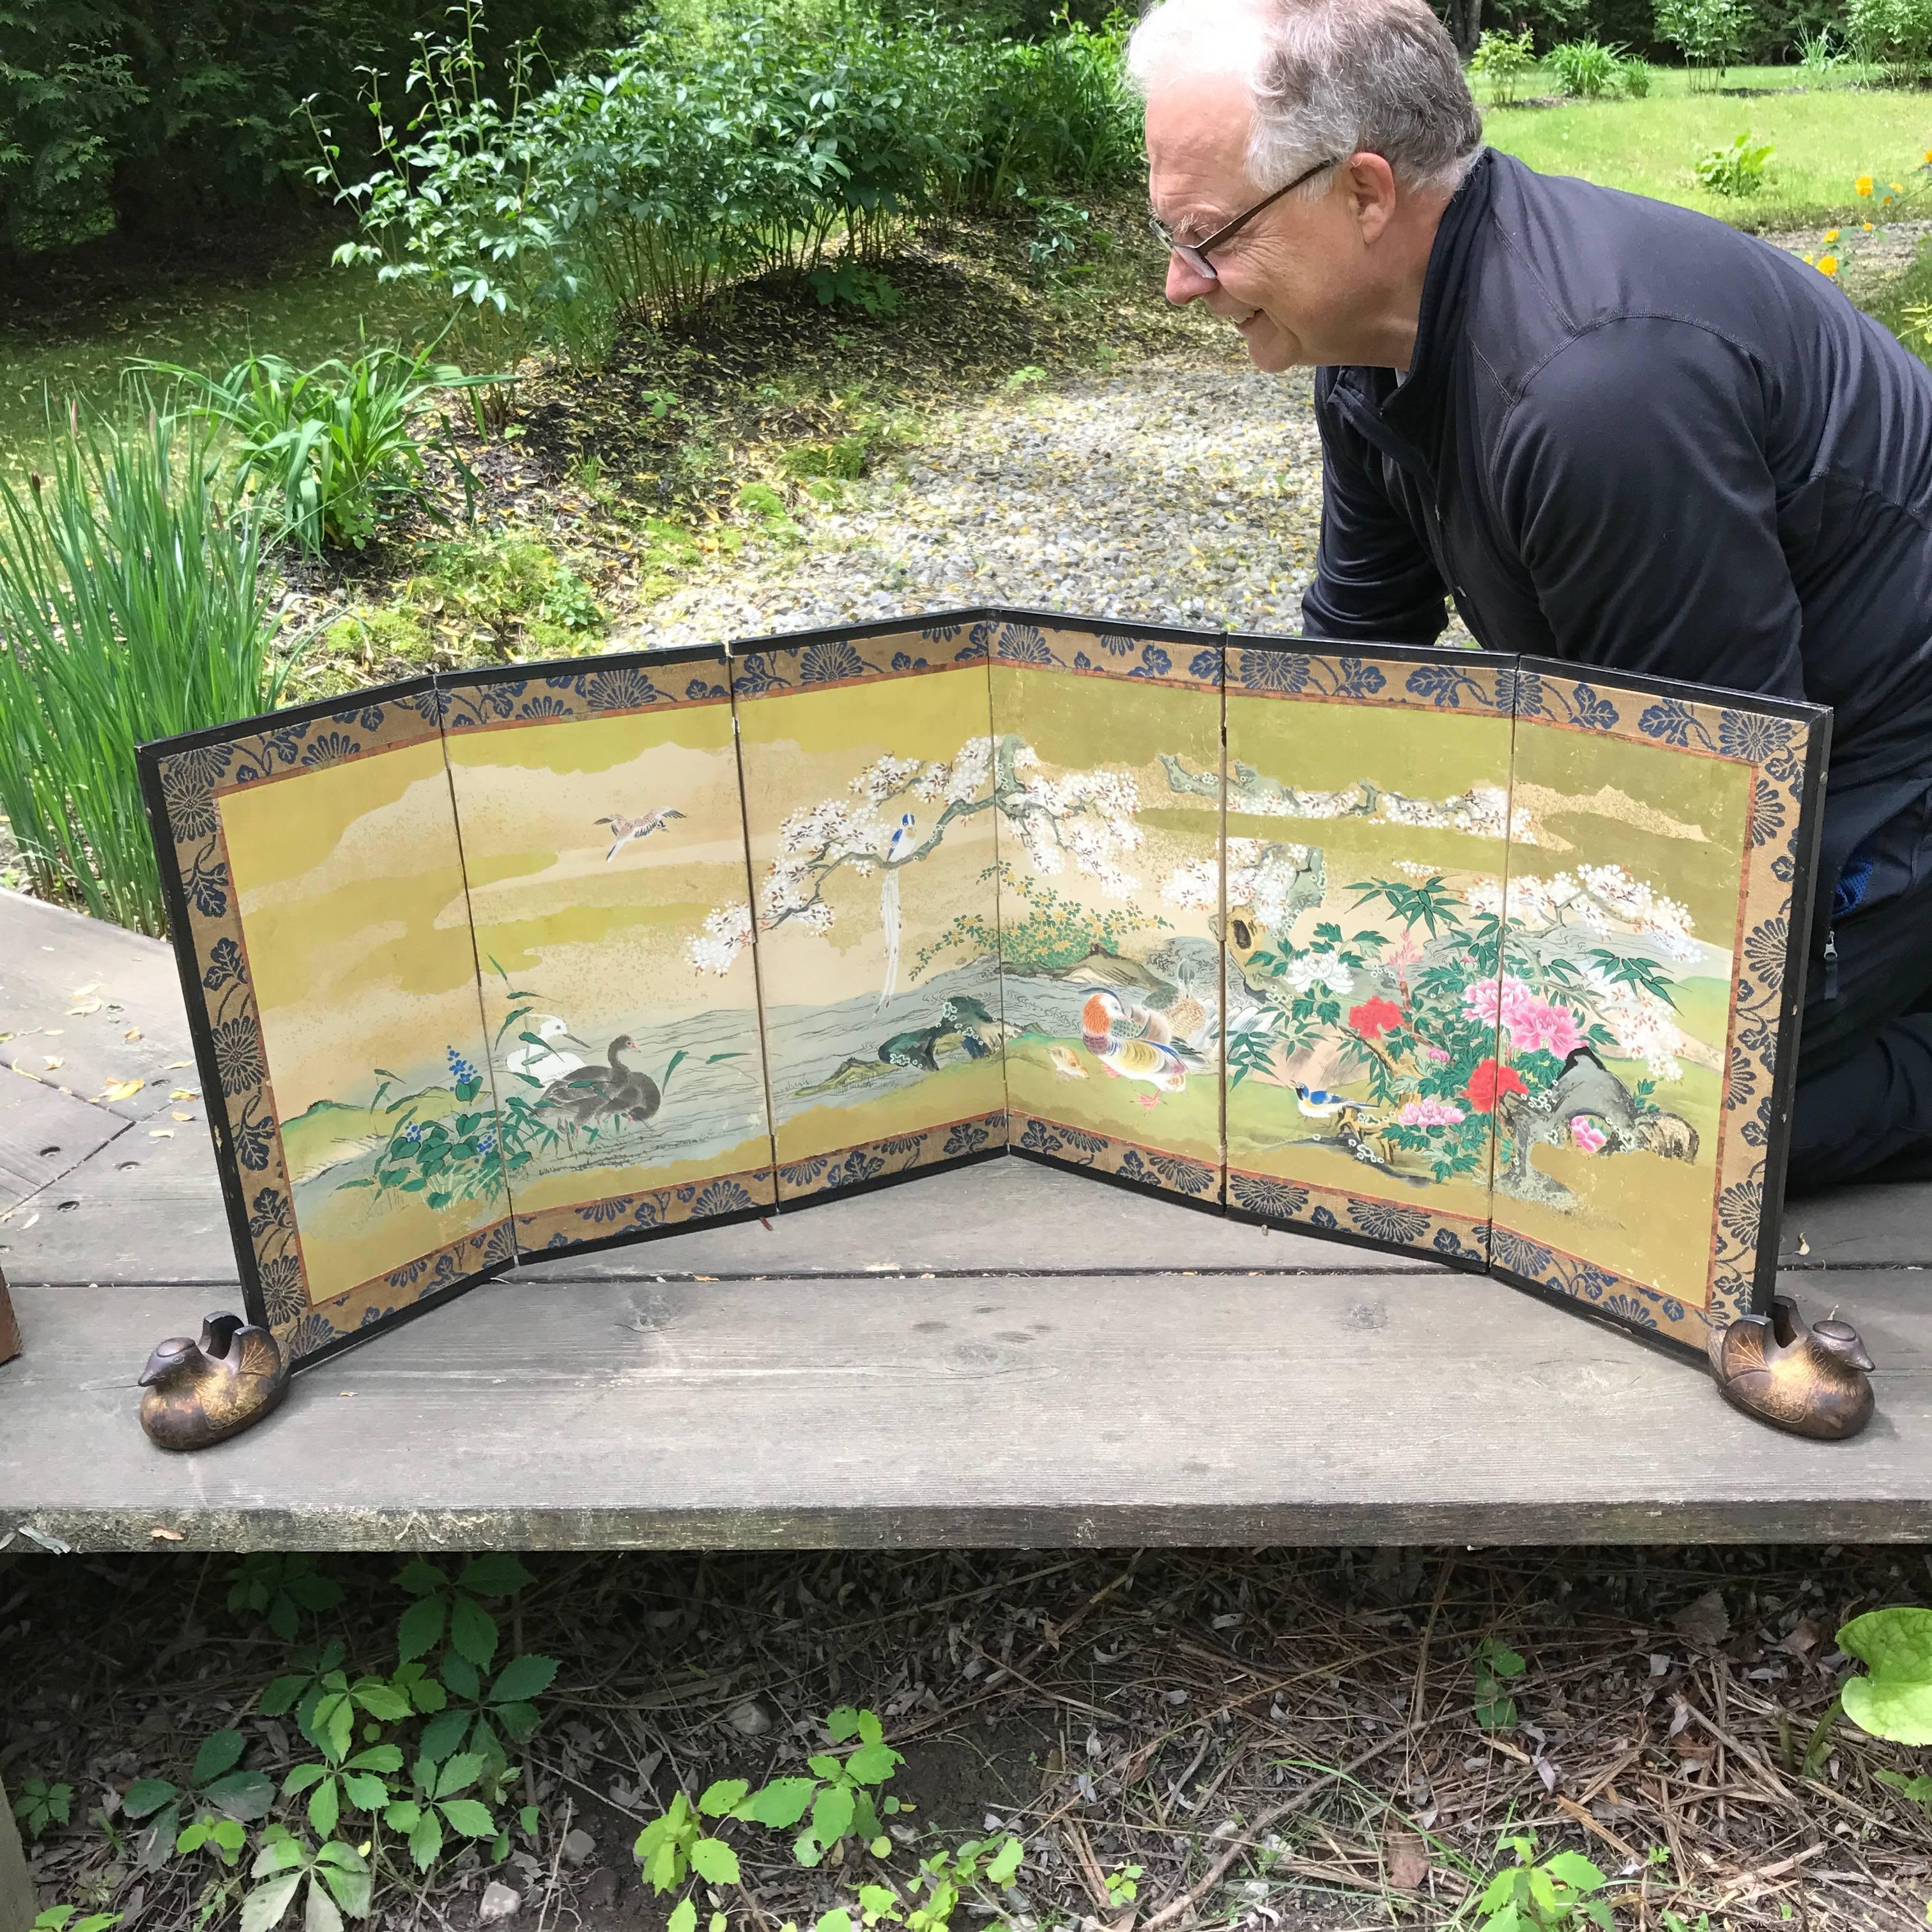 A fine early small-scale Japanese antique hand-painted six-panel folding screen byobu conceived in a convenient size 19.5 inches high and 52.5 inches length.

One of a rare pair currently available. (see other listing)

Lovely vivid colors